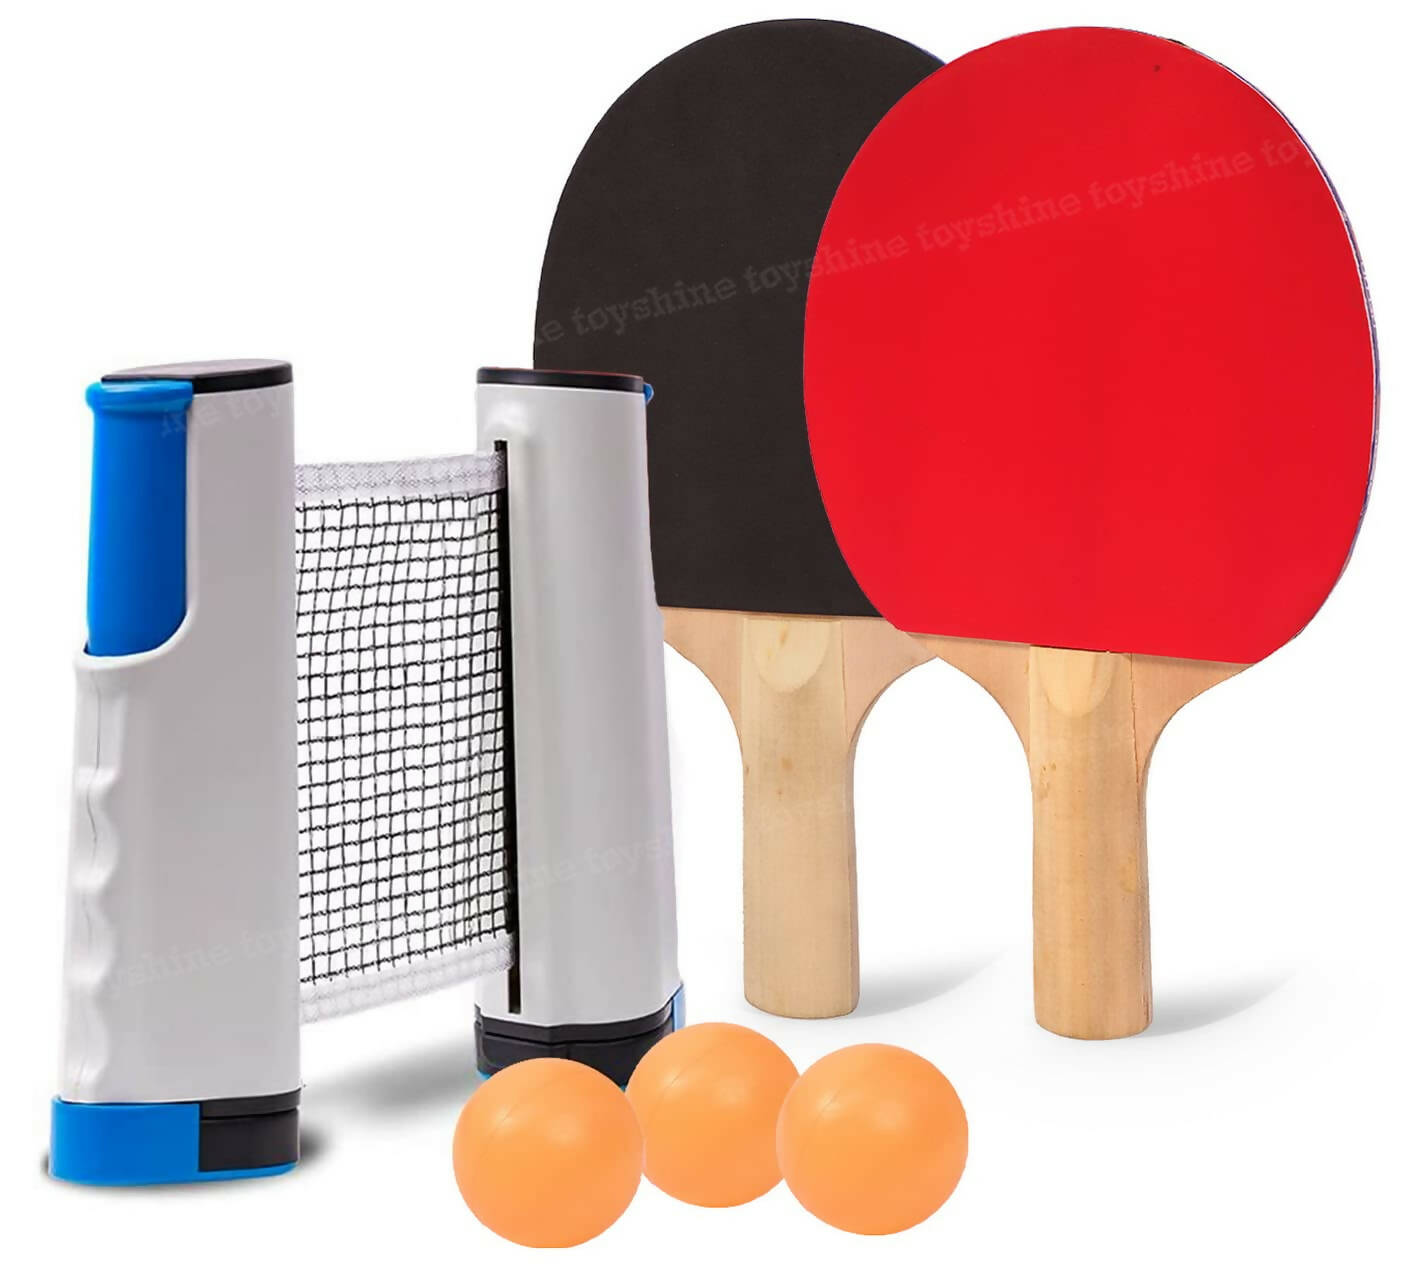 Ping Pong Table Tennis Racket Set With Net And Three Balls For Children, Kids